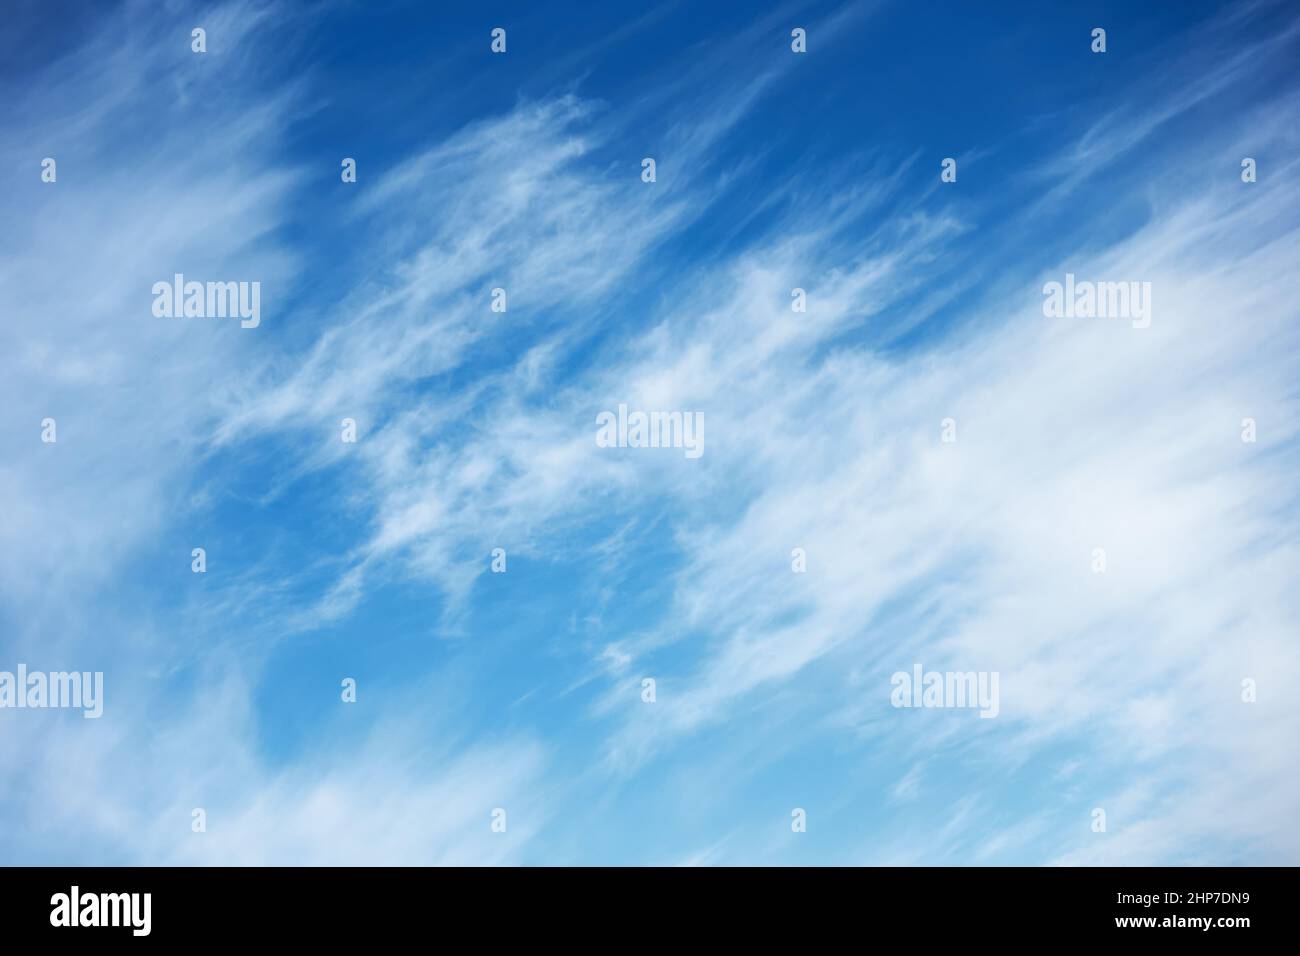 Abstract background with fast moving clouds in the blue sky Stock Photo